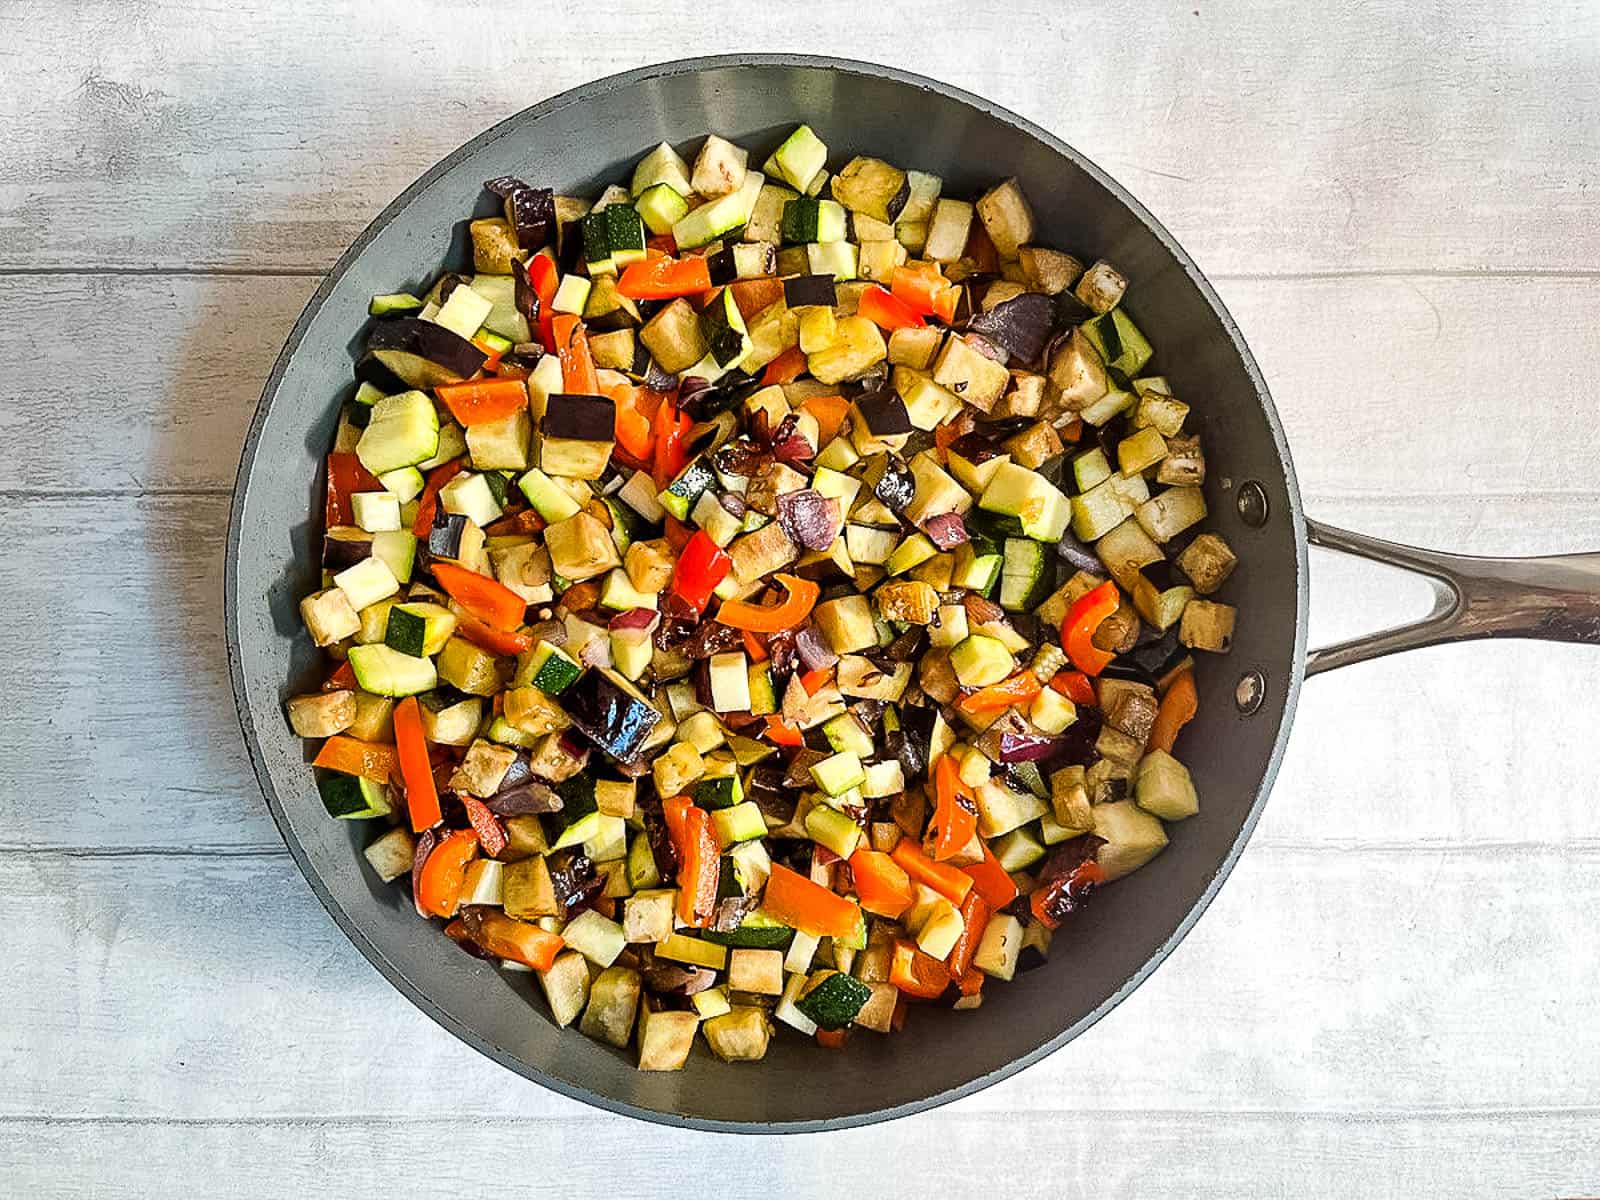 diced aubergine, courgette, red pepper and red onion in large frying pan